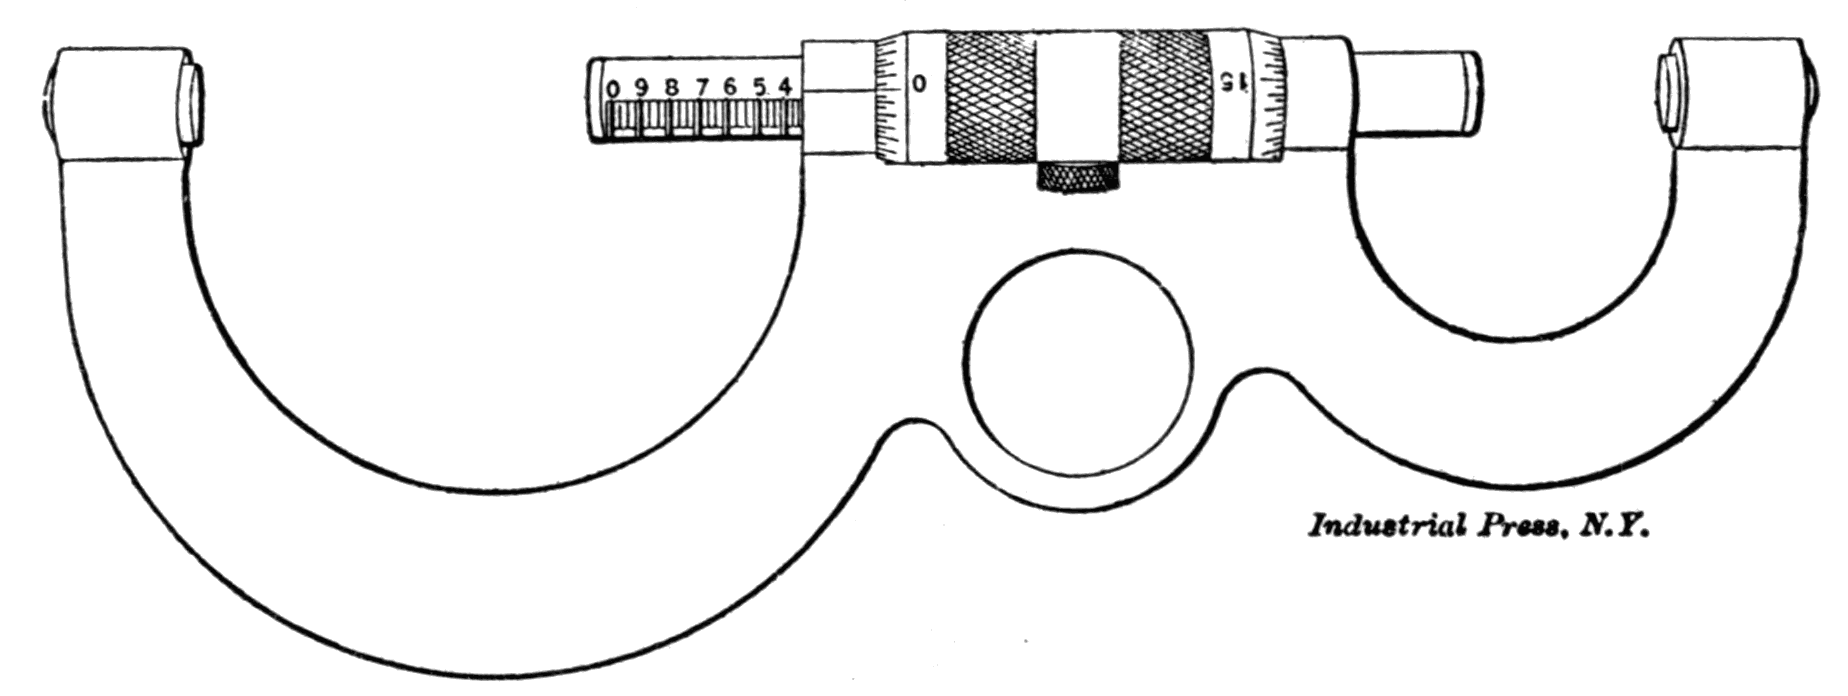 Fig. 26. Combined One- and Two-inch Micrometer